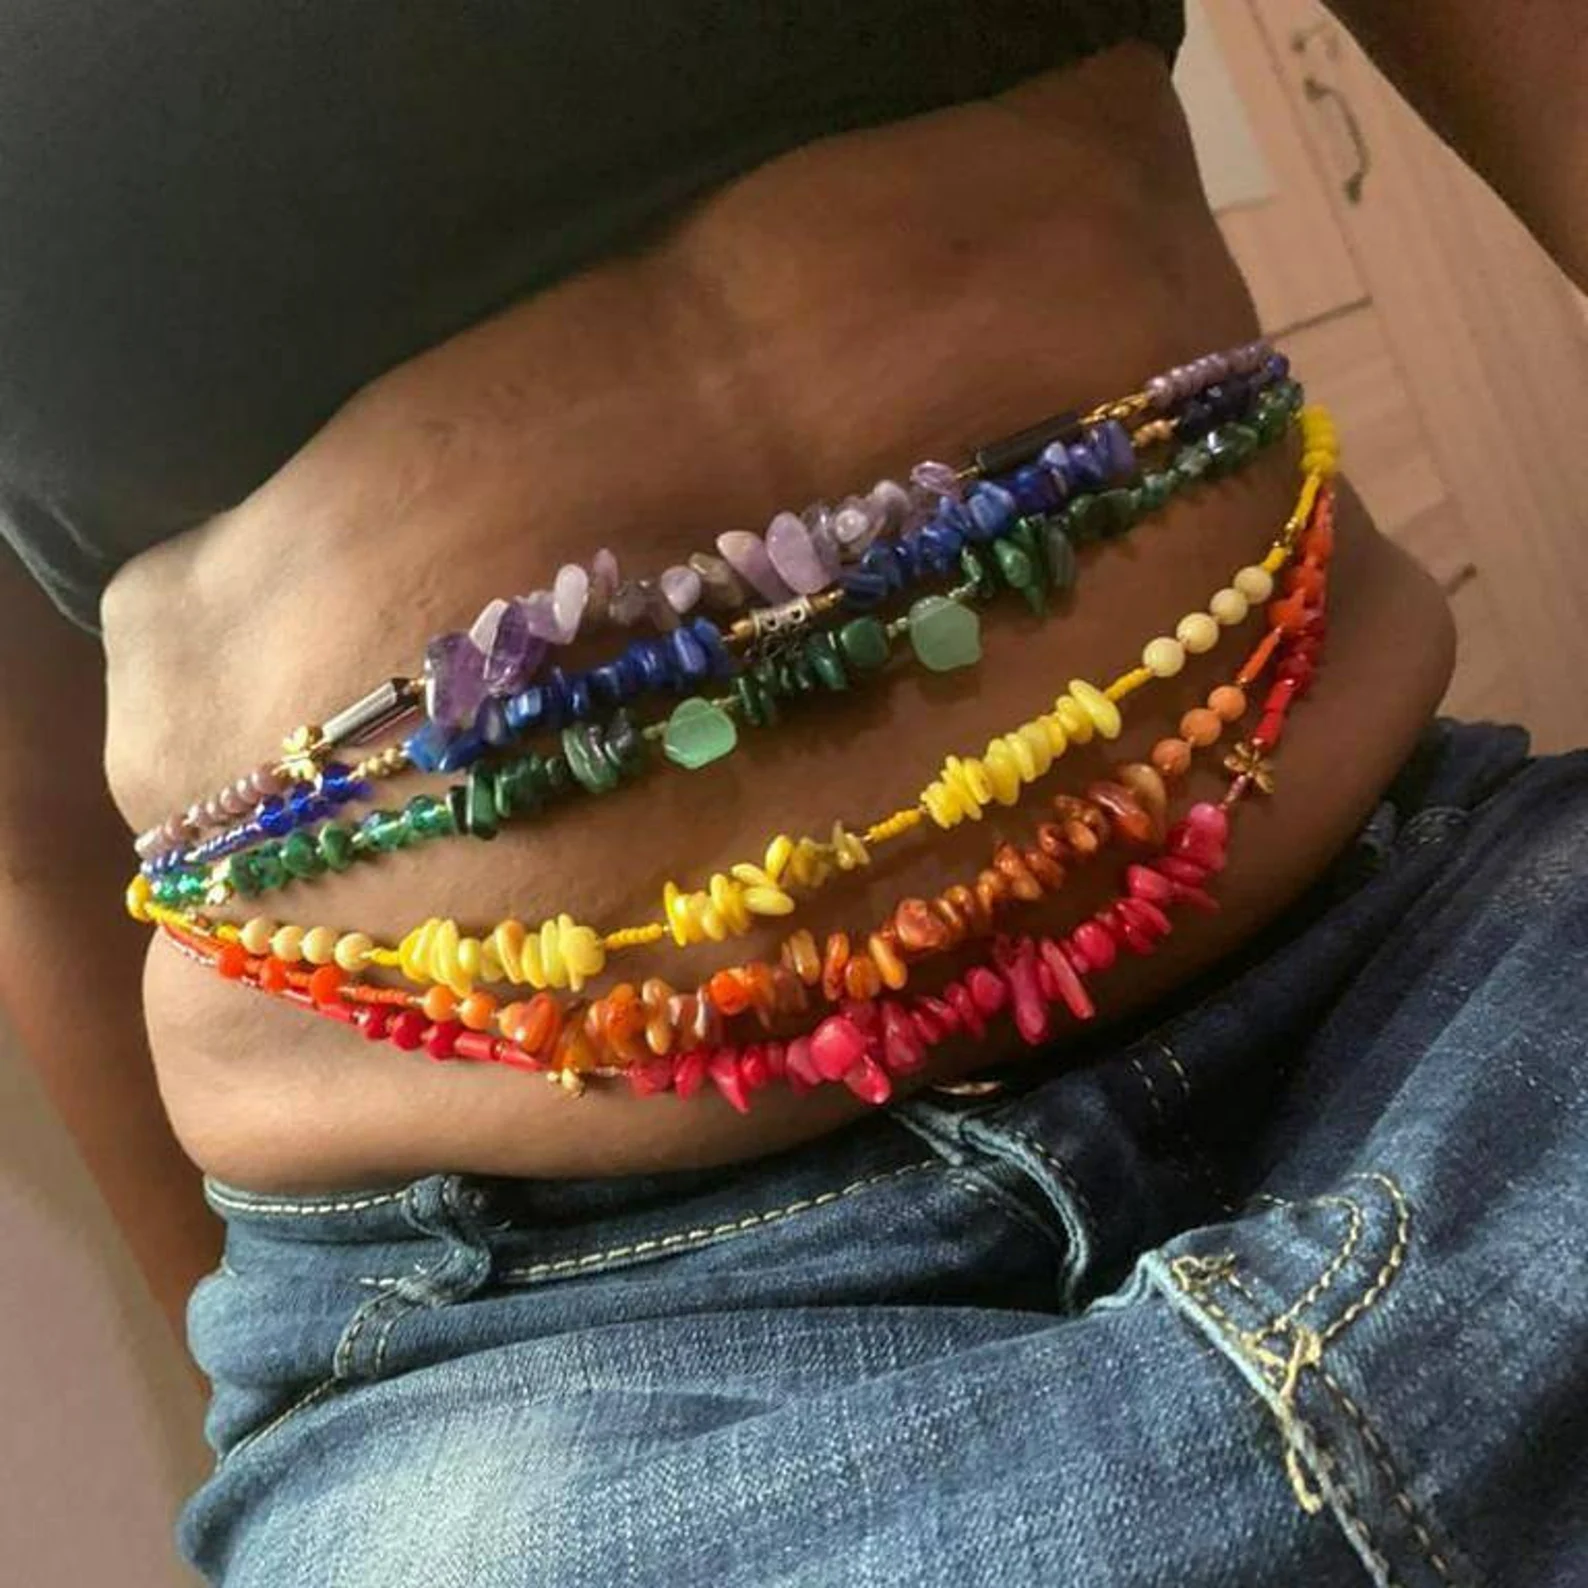 https://www.etsy.com/listing/1079973151/chakra-tie-on-waist-beads-to-balance?click_key=e762530a3ca487d49bf4b751d8cd0bb934f222c6%3A1079973151&click_sum=225f63fa&ref=related-1&variation1=2227607581